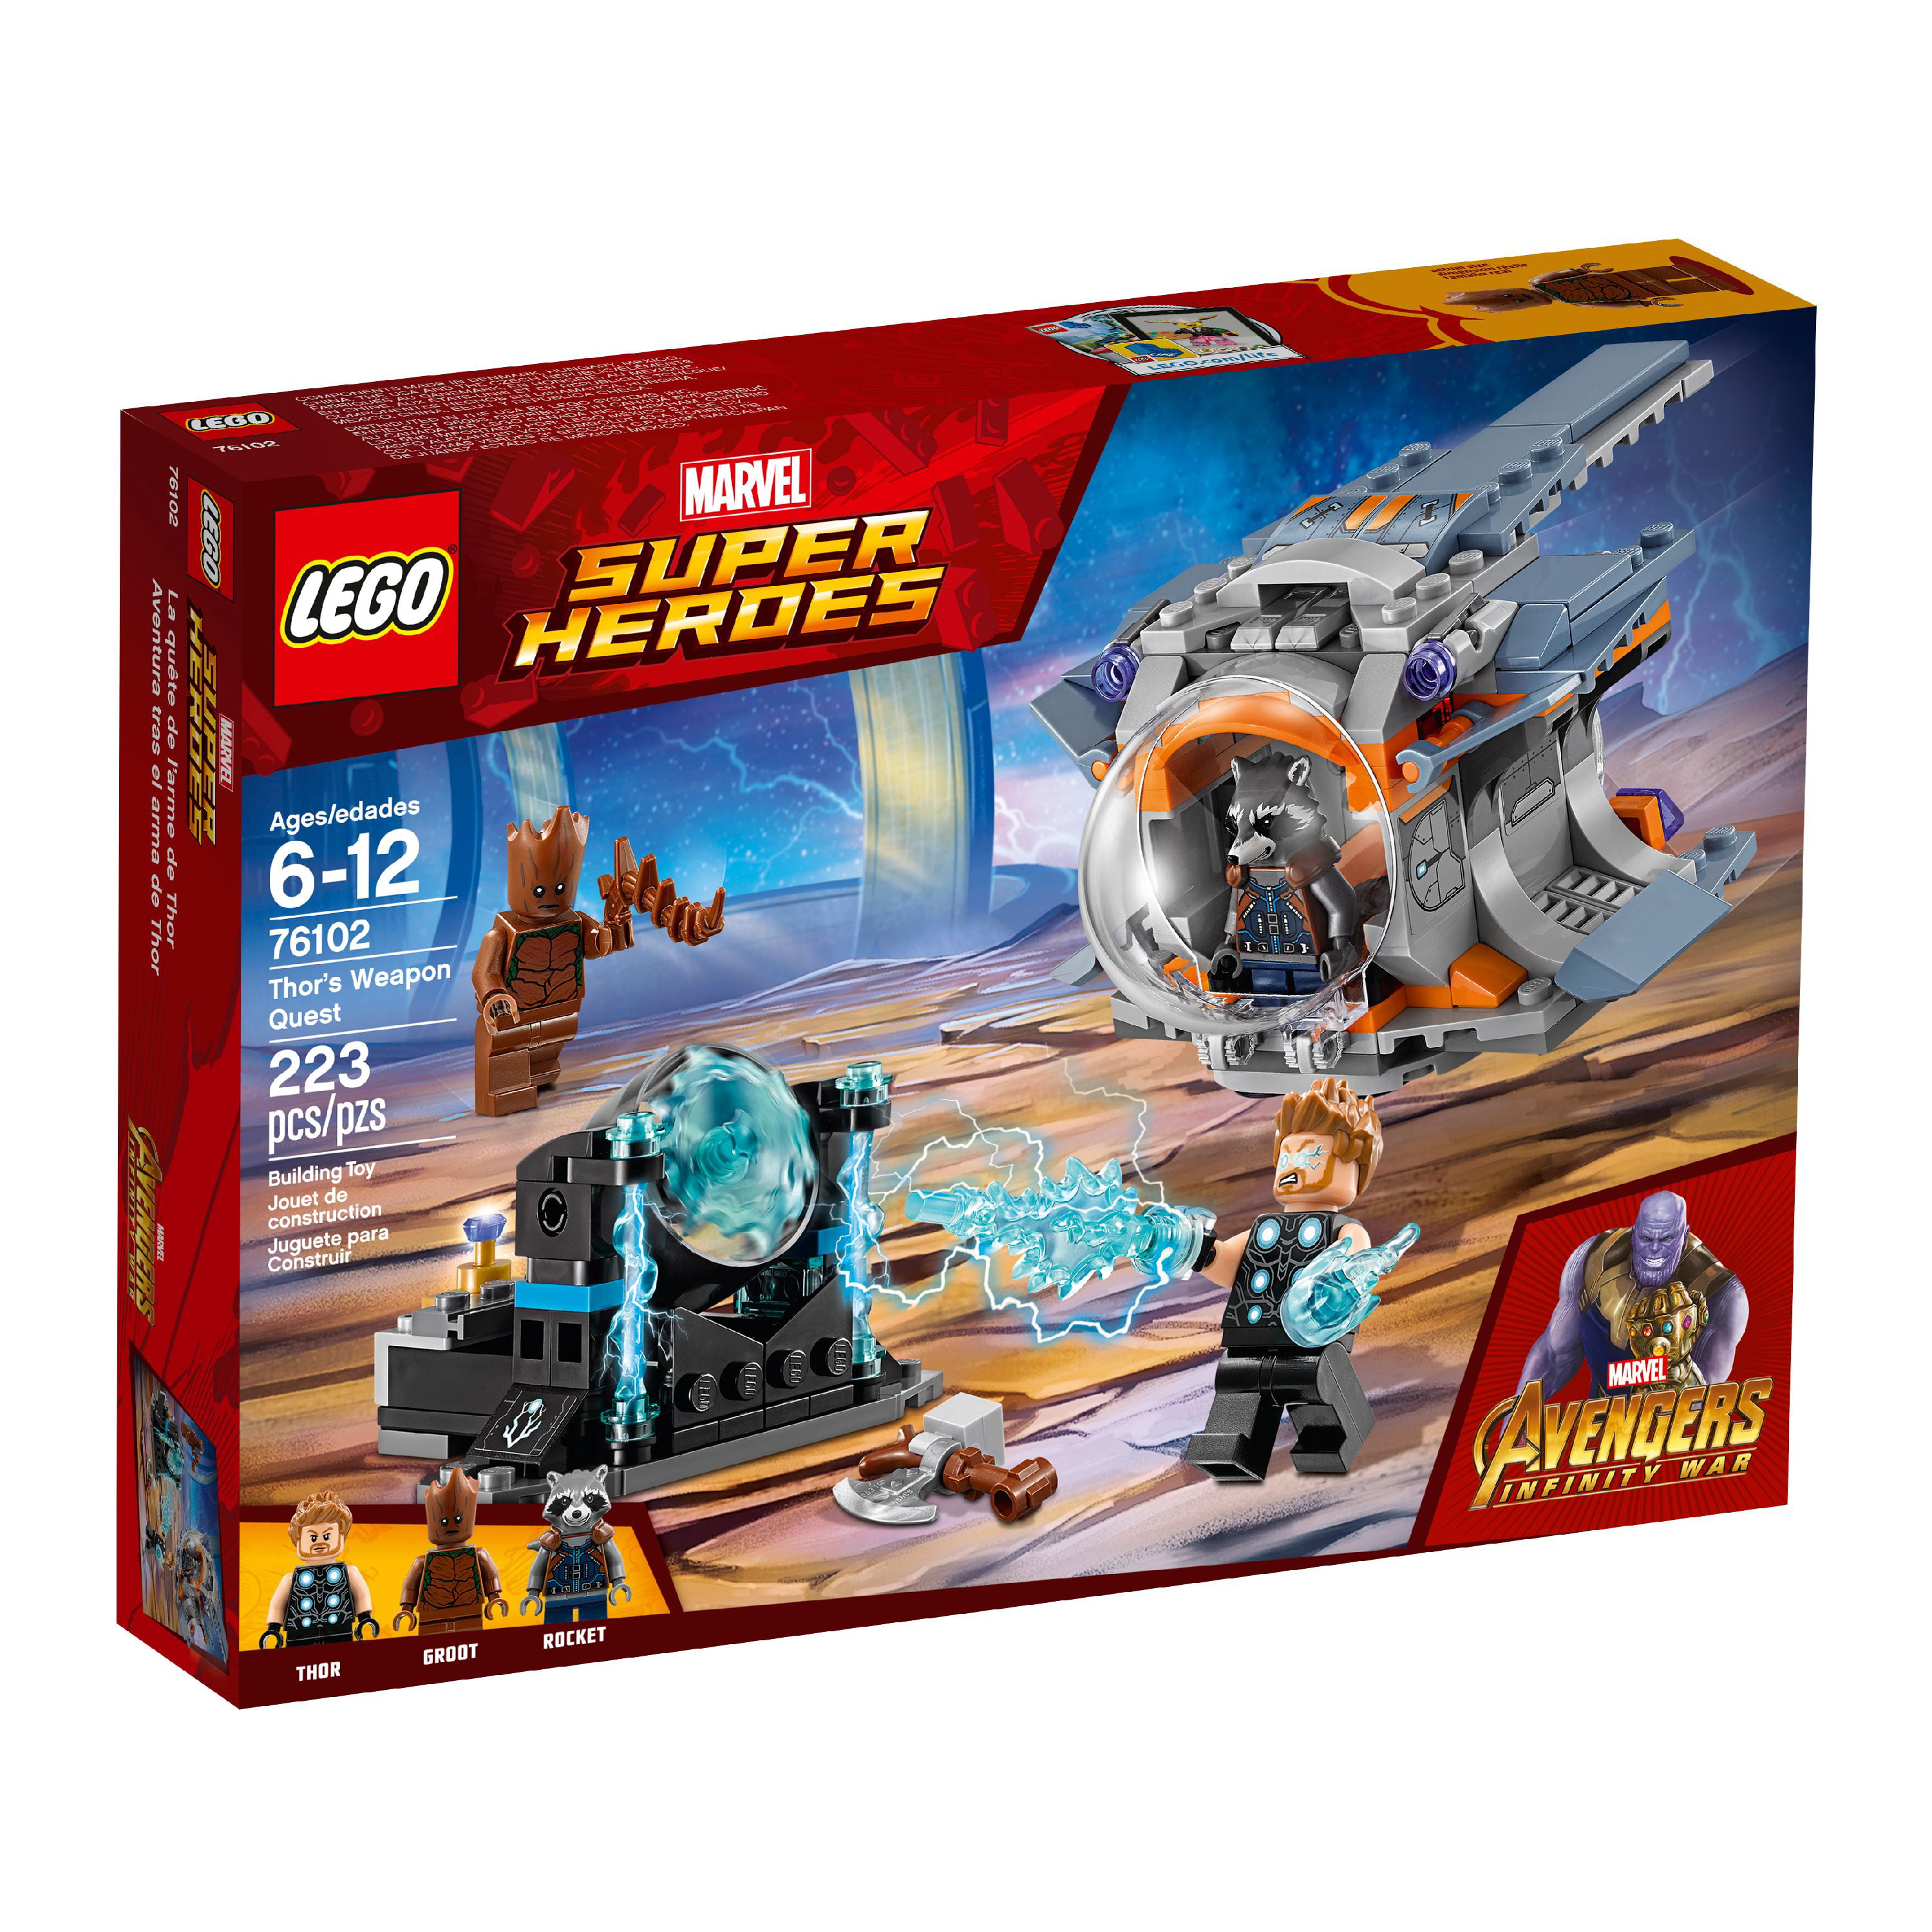 Lego 76102 Marvel Super Heroes Thor's Weapon Quest 223pcs 